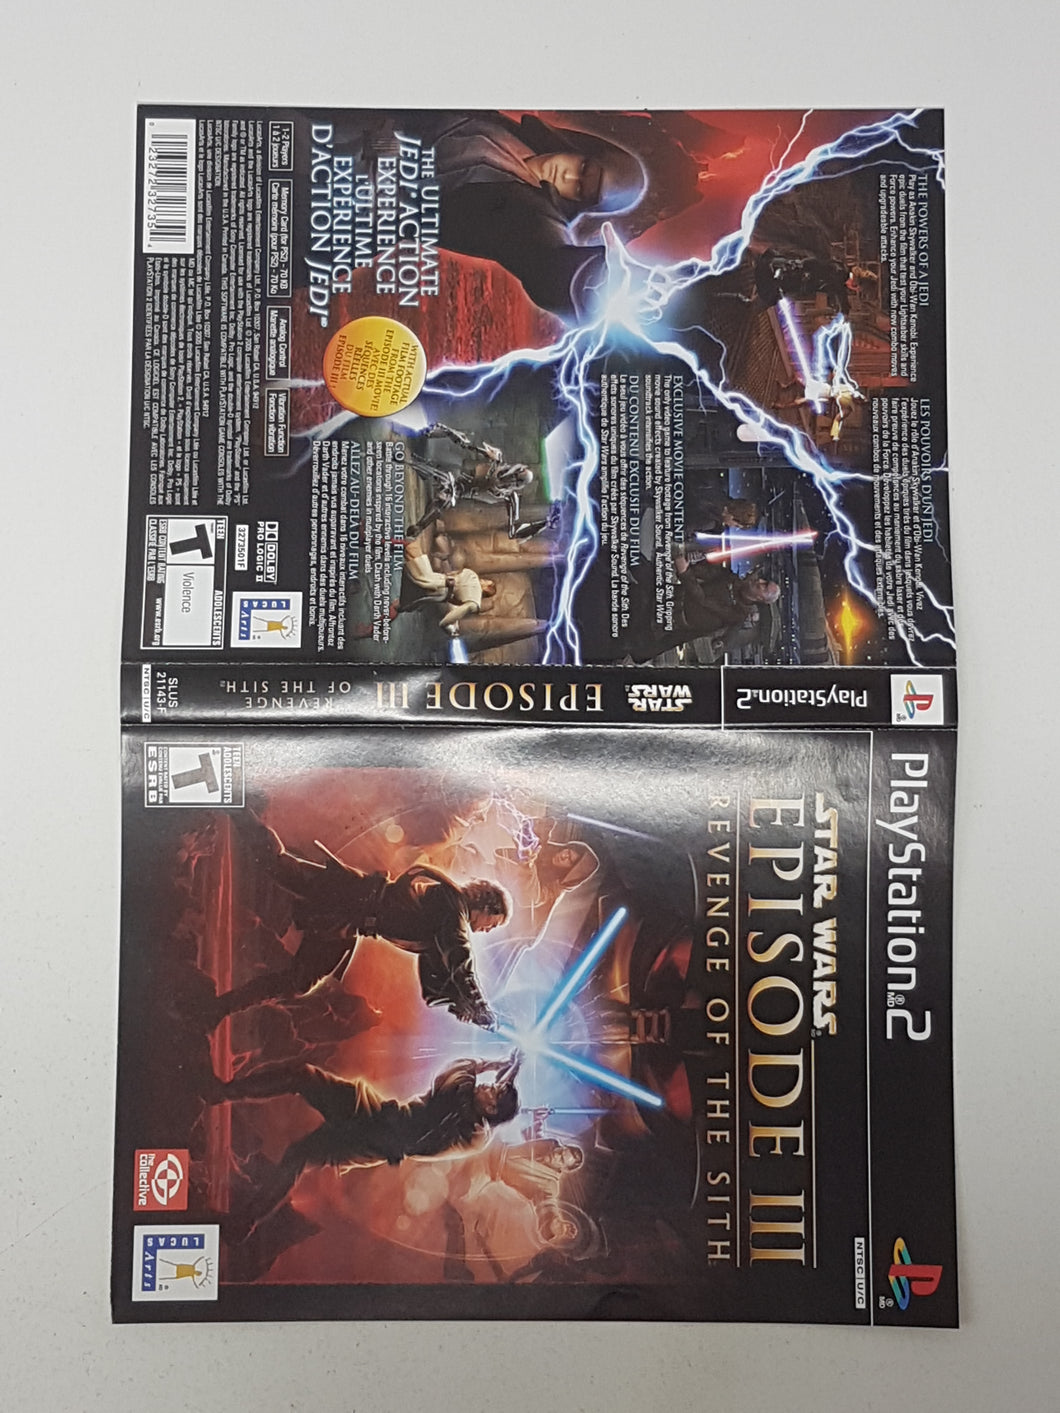 Star Wars Episode III Revenge of the Sith [Couverture] - Sony Playstation 2 | PS2